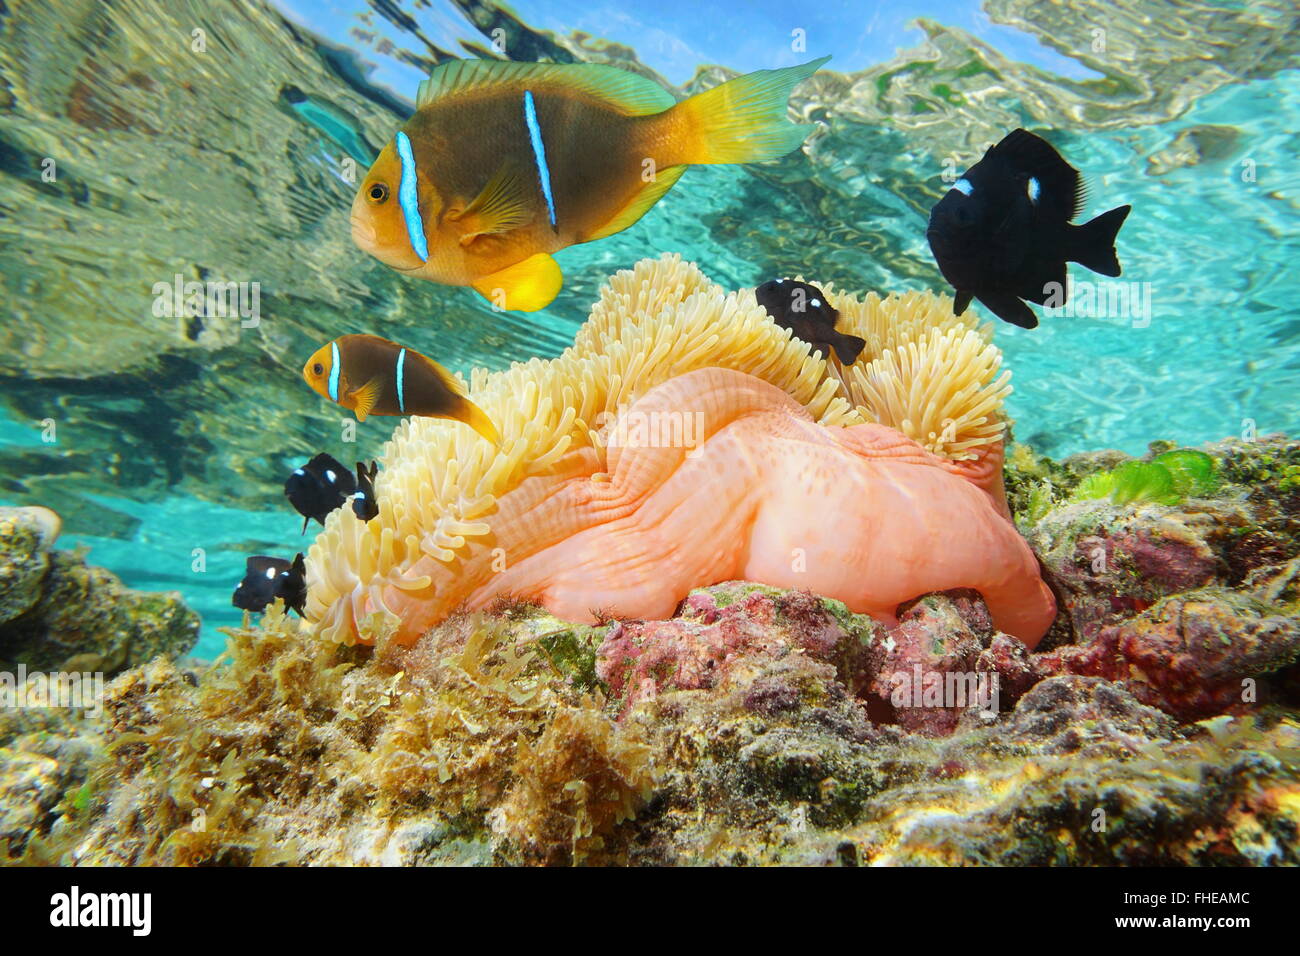 Magnificent sea anemone with fish orange-fin anemonefish and three-spot dascyllus, Huahine, Pacific ocean, French Polynesia Stock Photo